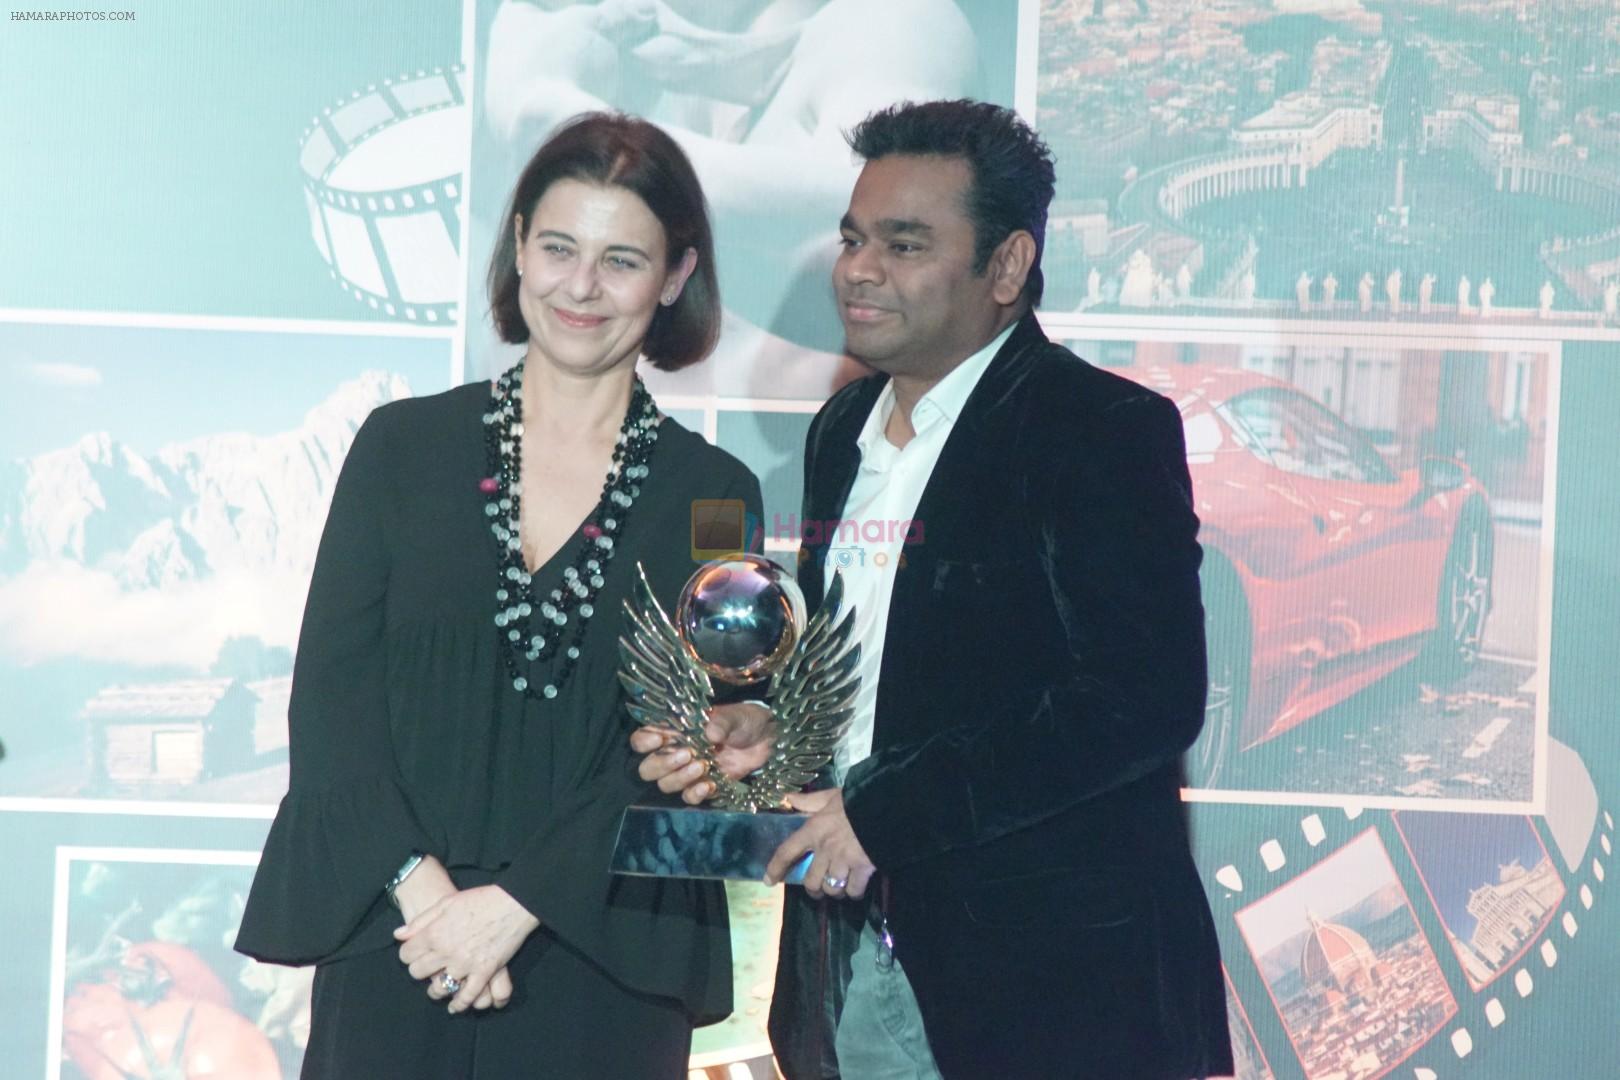 A R Rahman at Red Carpet Of Volare Awards 2018 on 9th Feb 2018